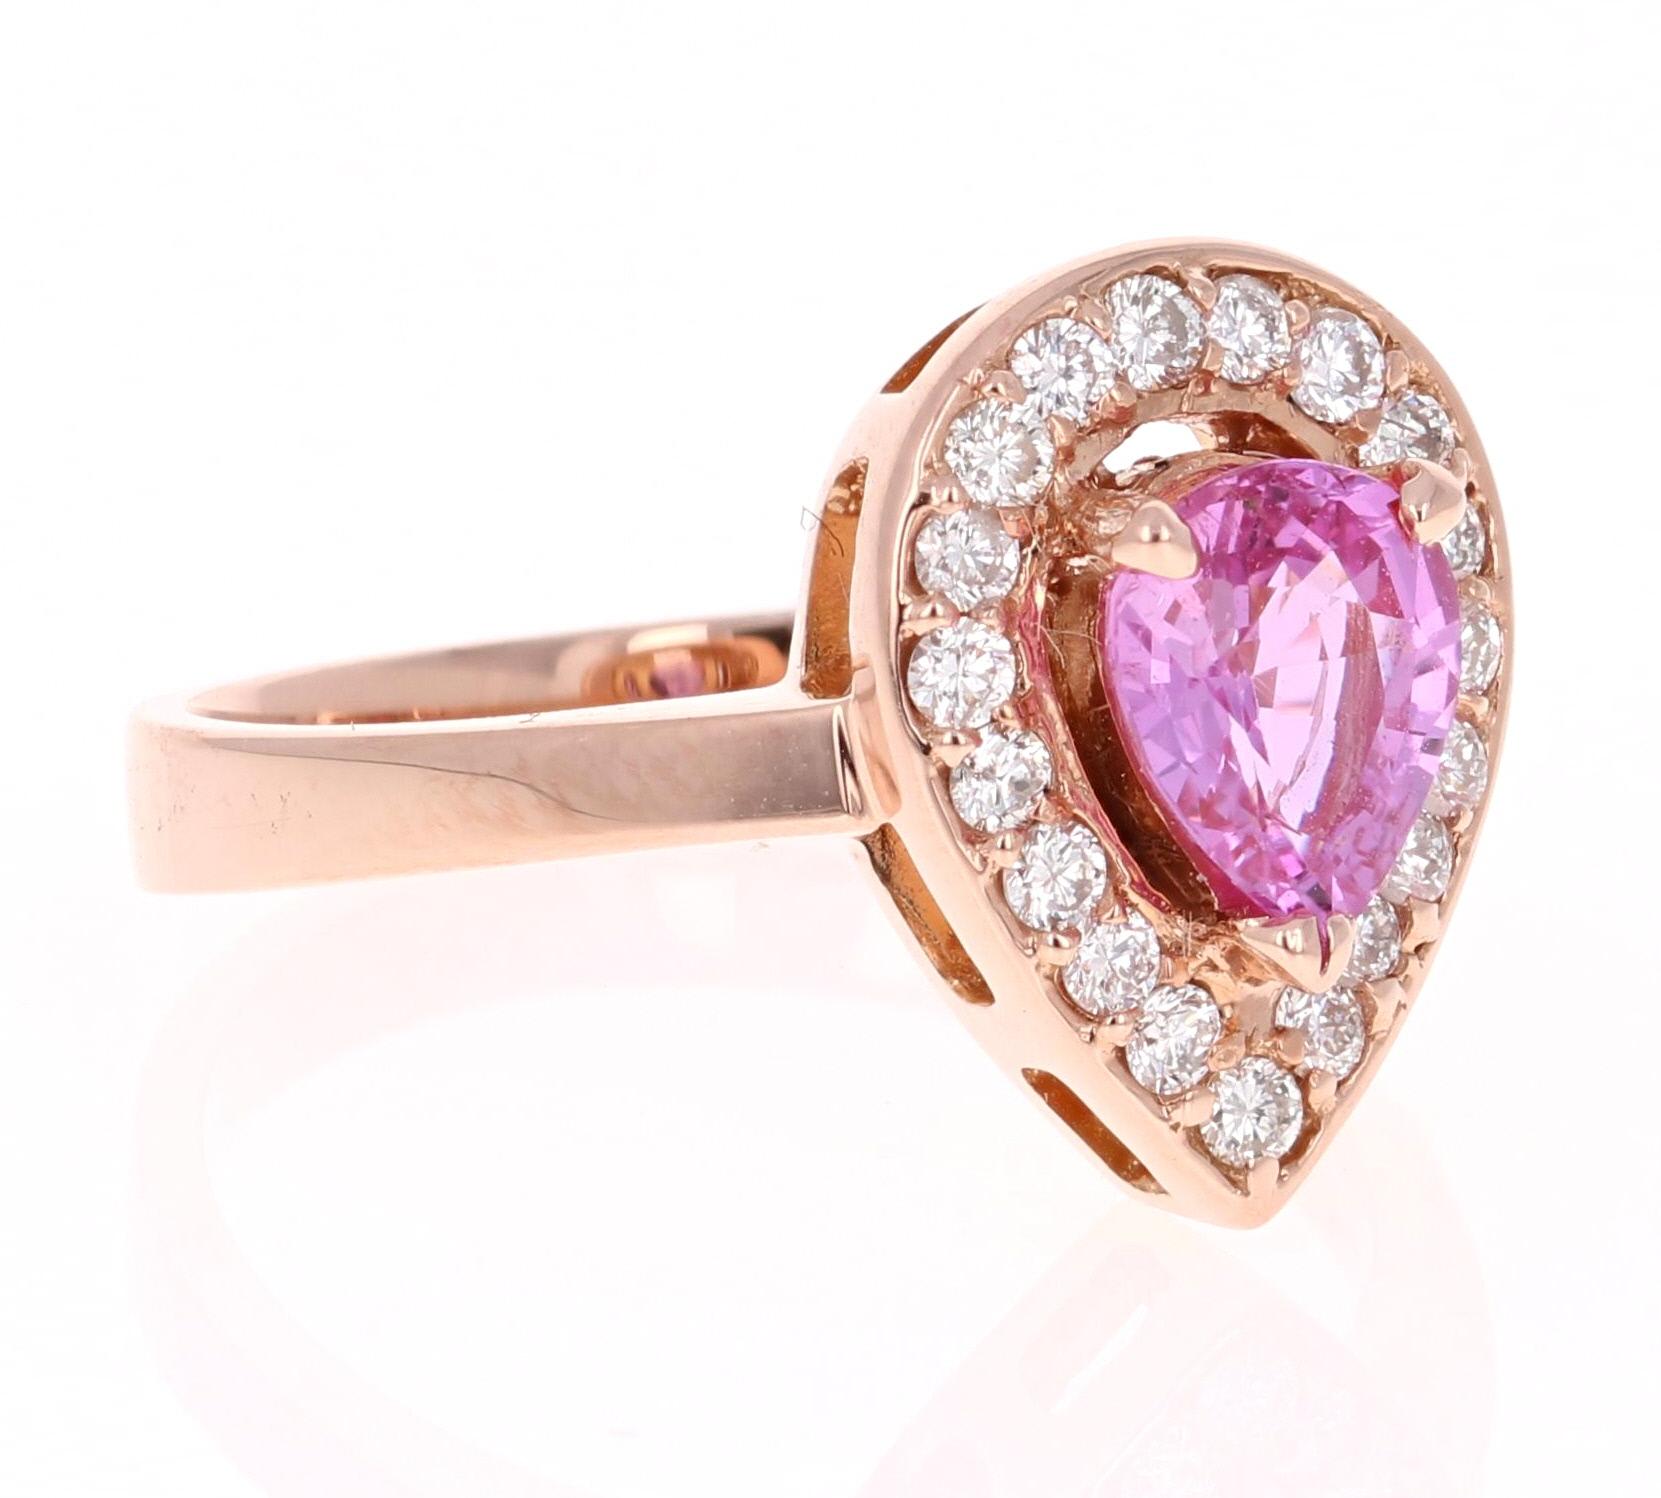 Cute Pink Sapphire and Diamond Ring! Can be an everyday ring or a unique Engagement Ring!

This beautiful ring has a Pear Cut Pink Sapphire that weights 1.11 Carats. 

The ring is embellished with 19 Round Cut Diamonds that weigh 0.36 Carats with a